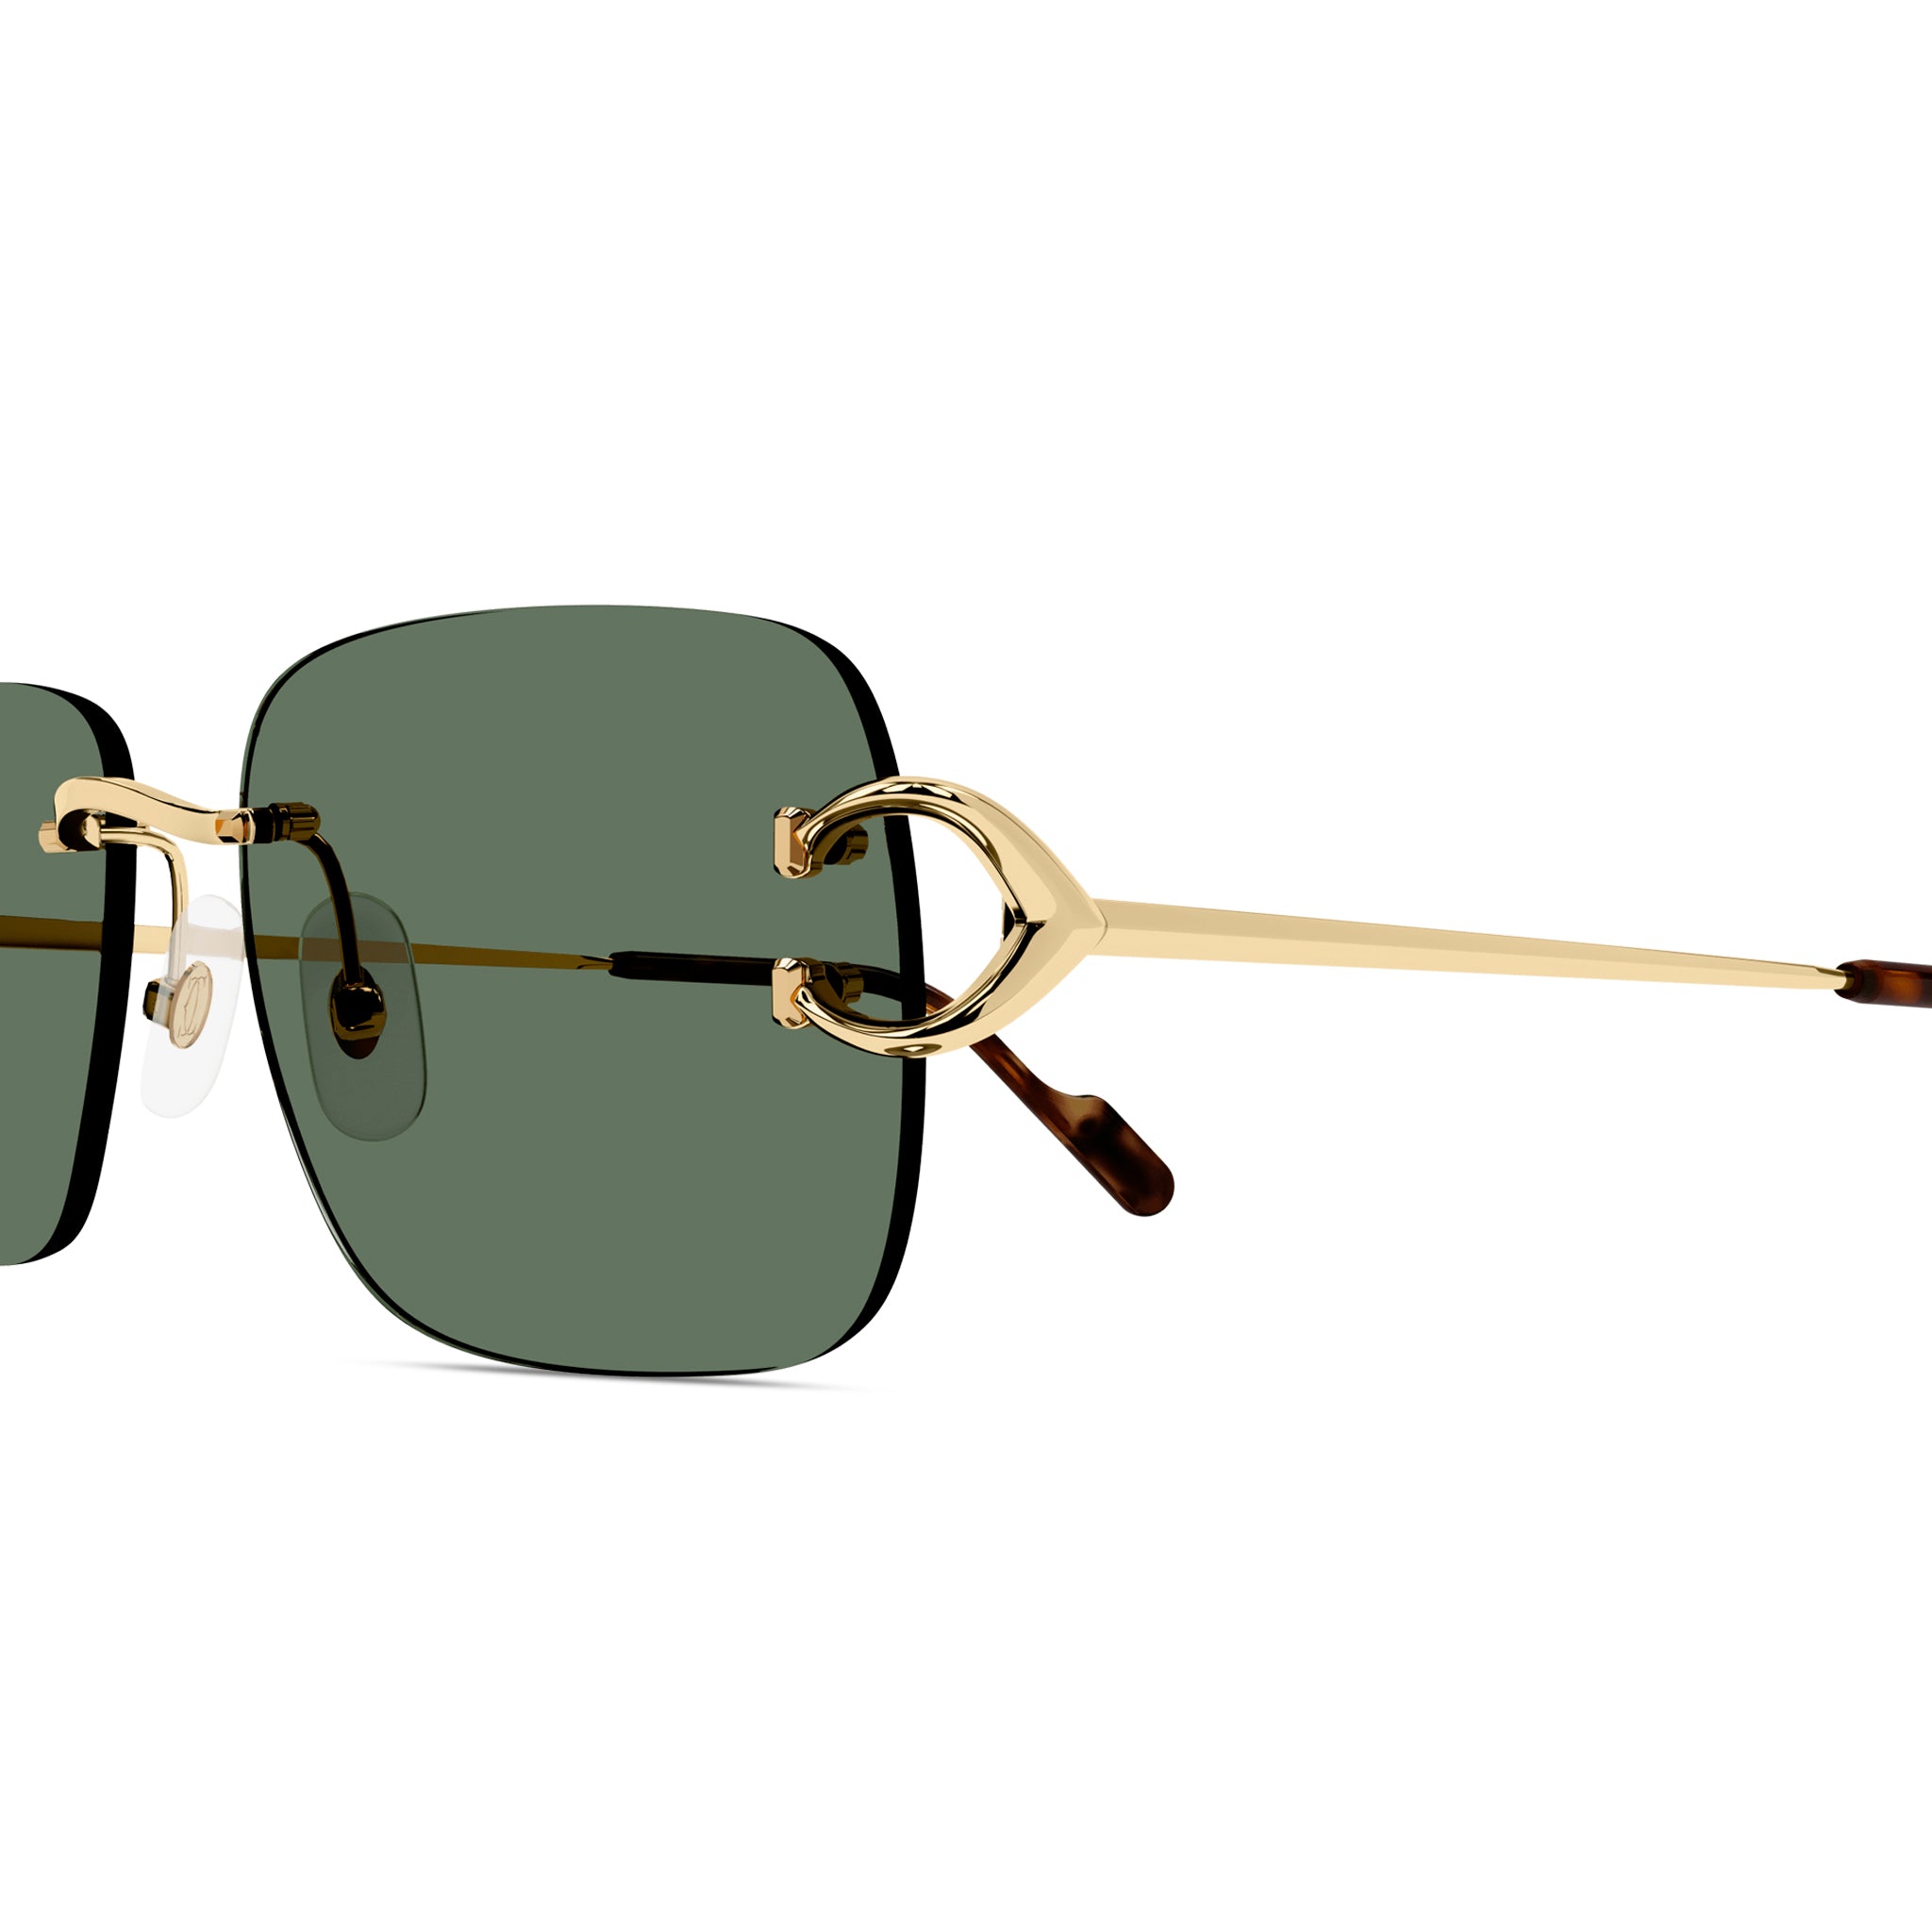 Detail view of Cartier Eyewear CT0330S-005 C Decor Gold Green Rimless Sunglasses CT0330S-005